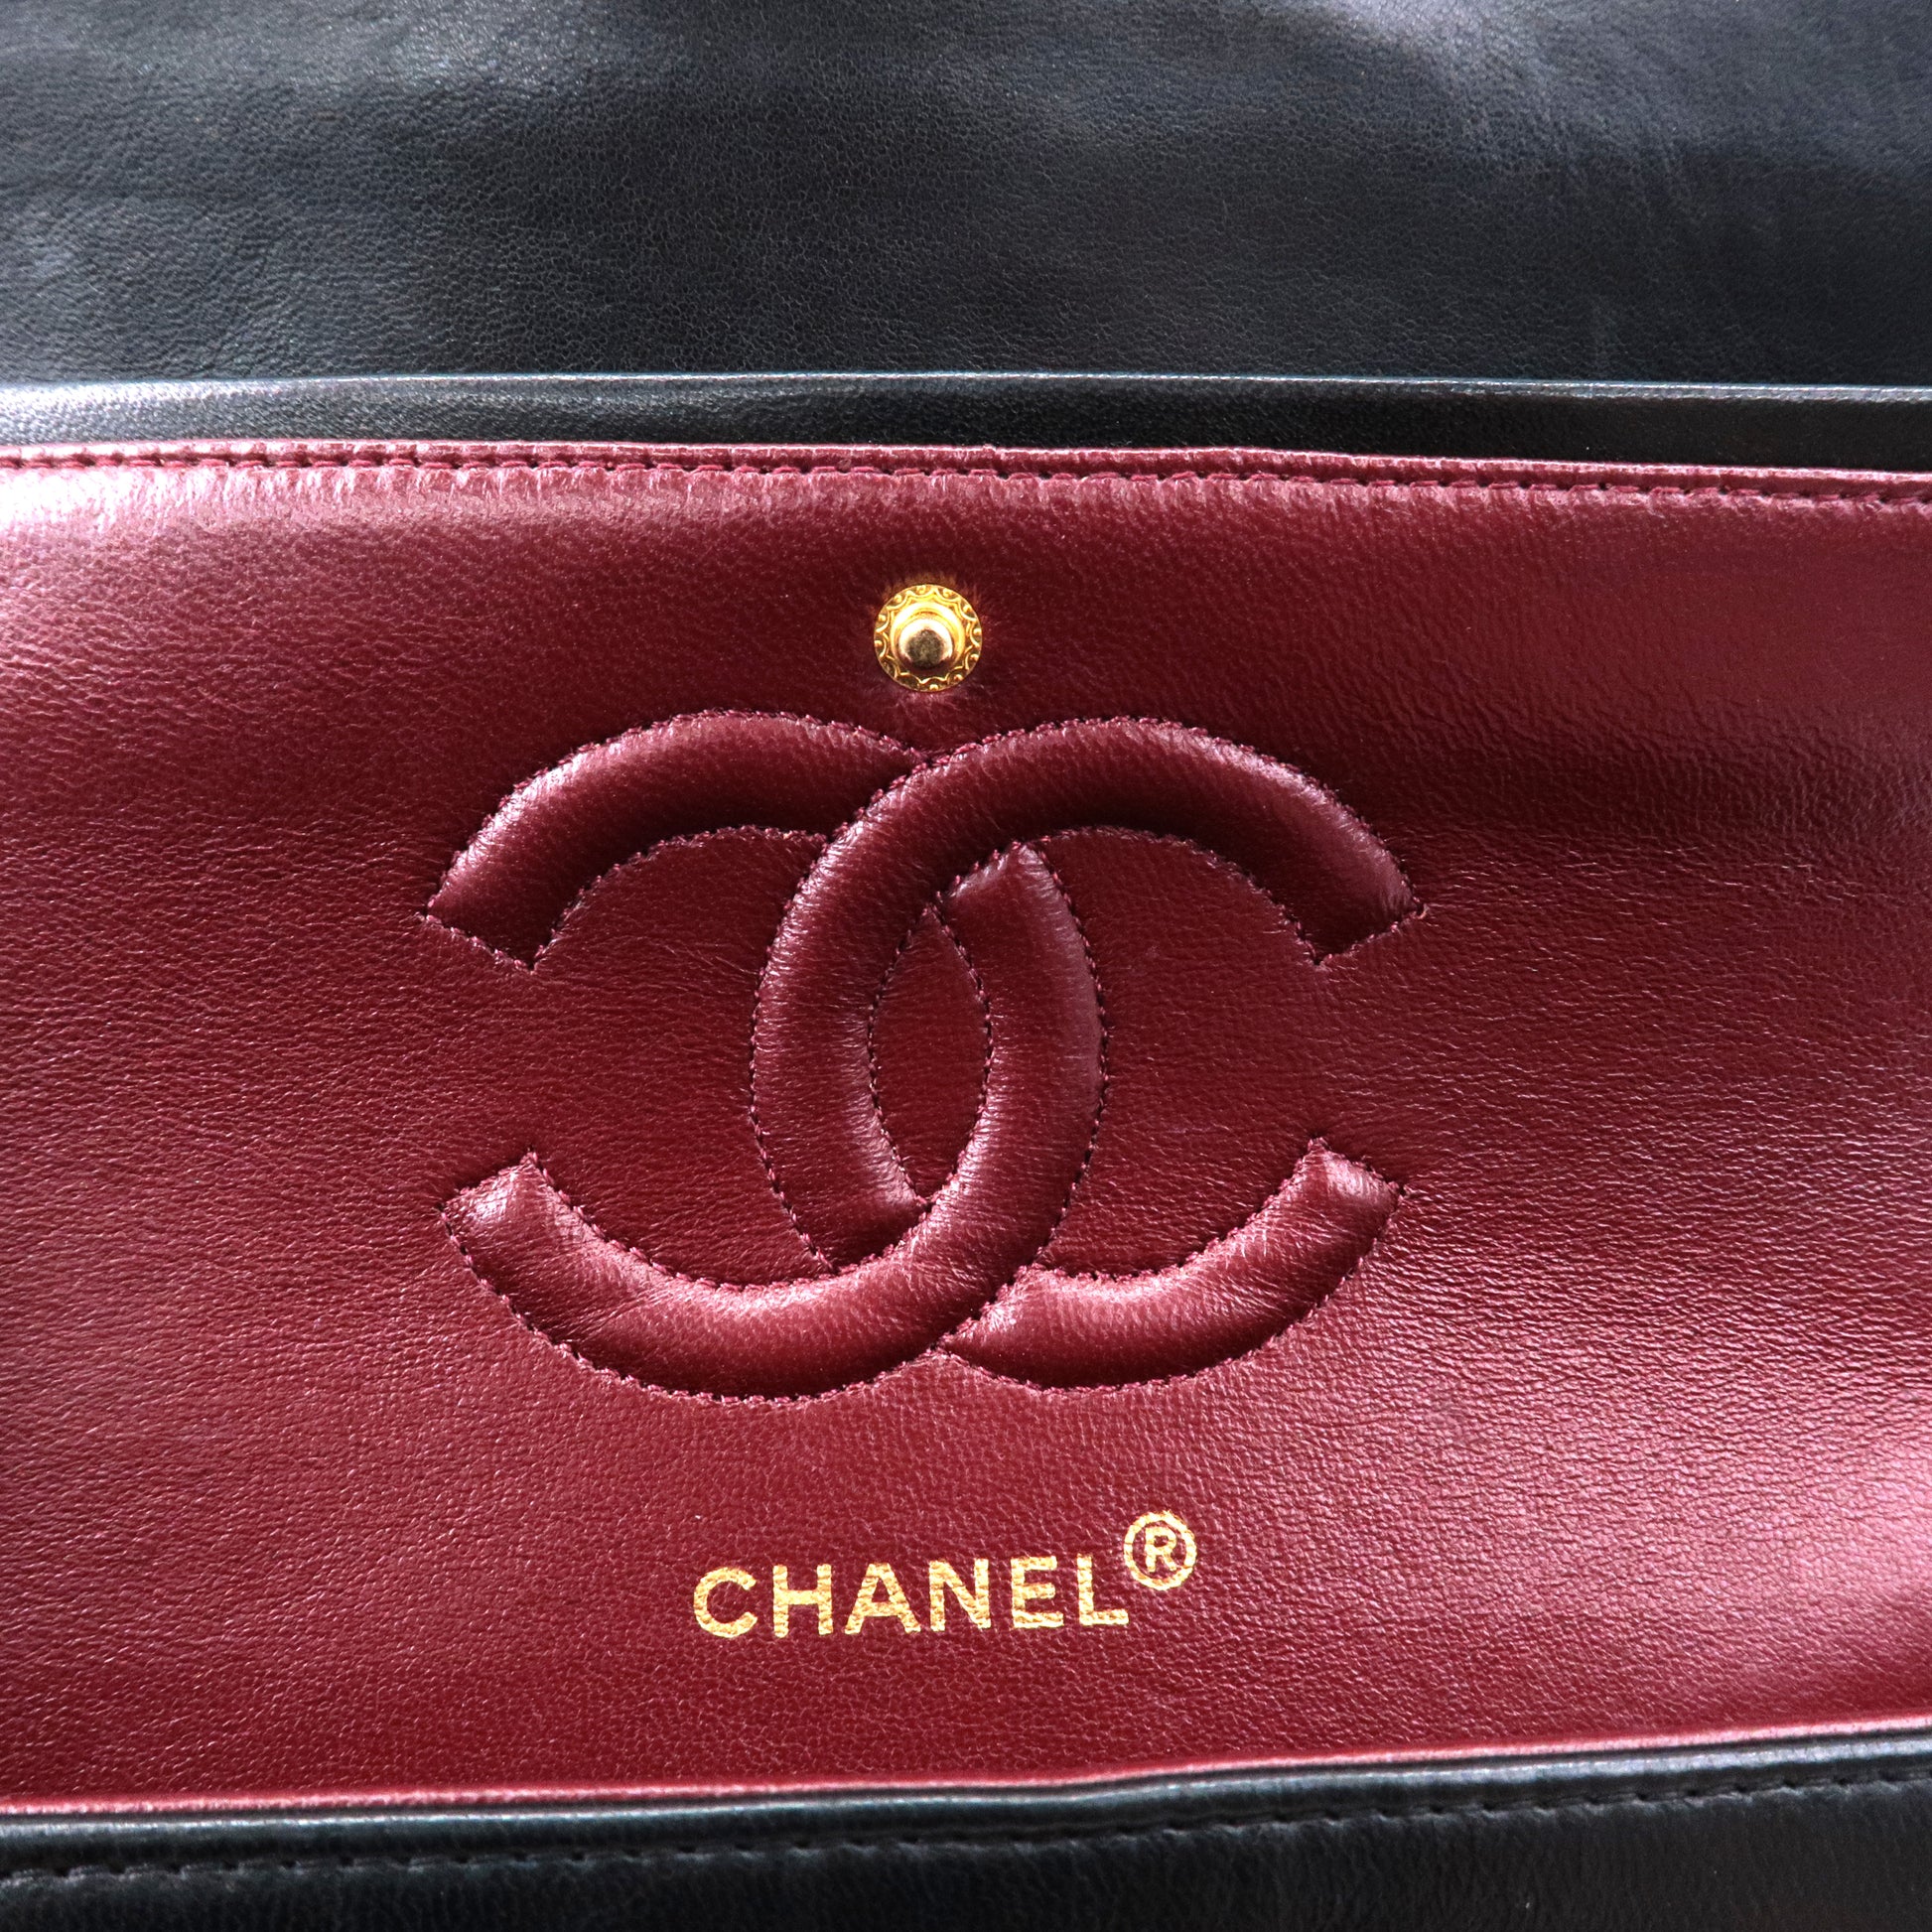 free chanel bag with purchase